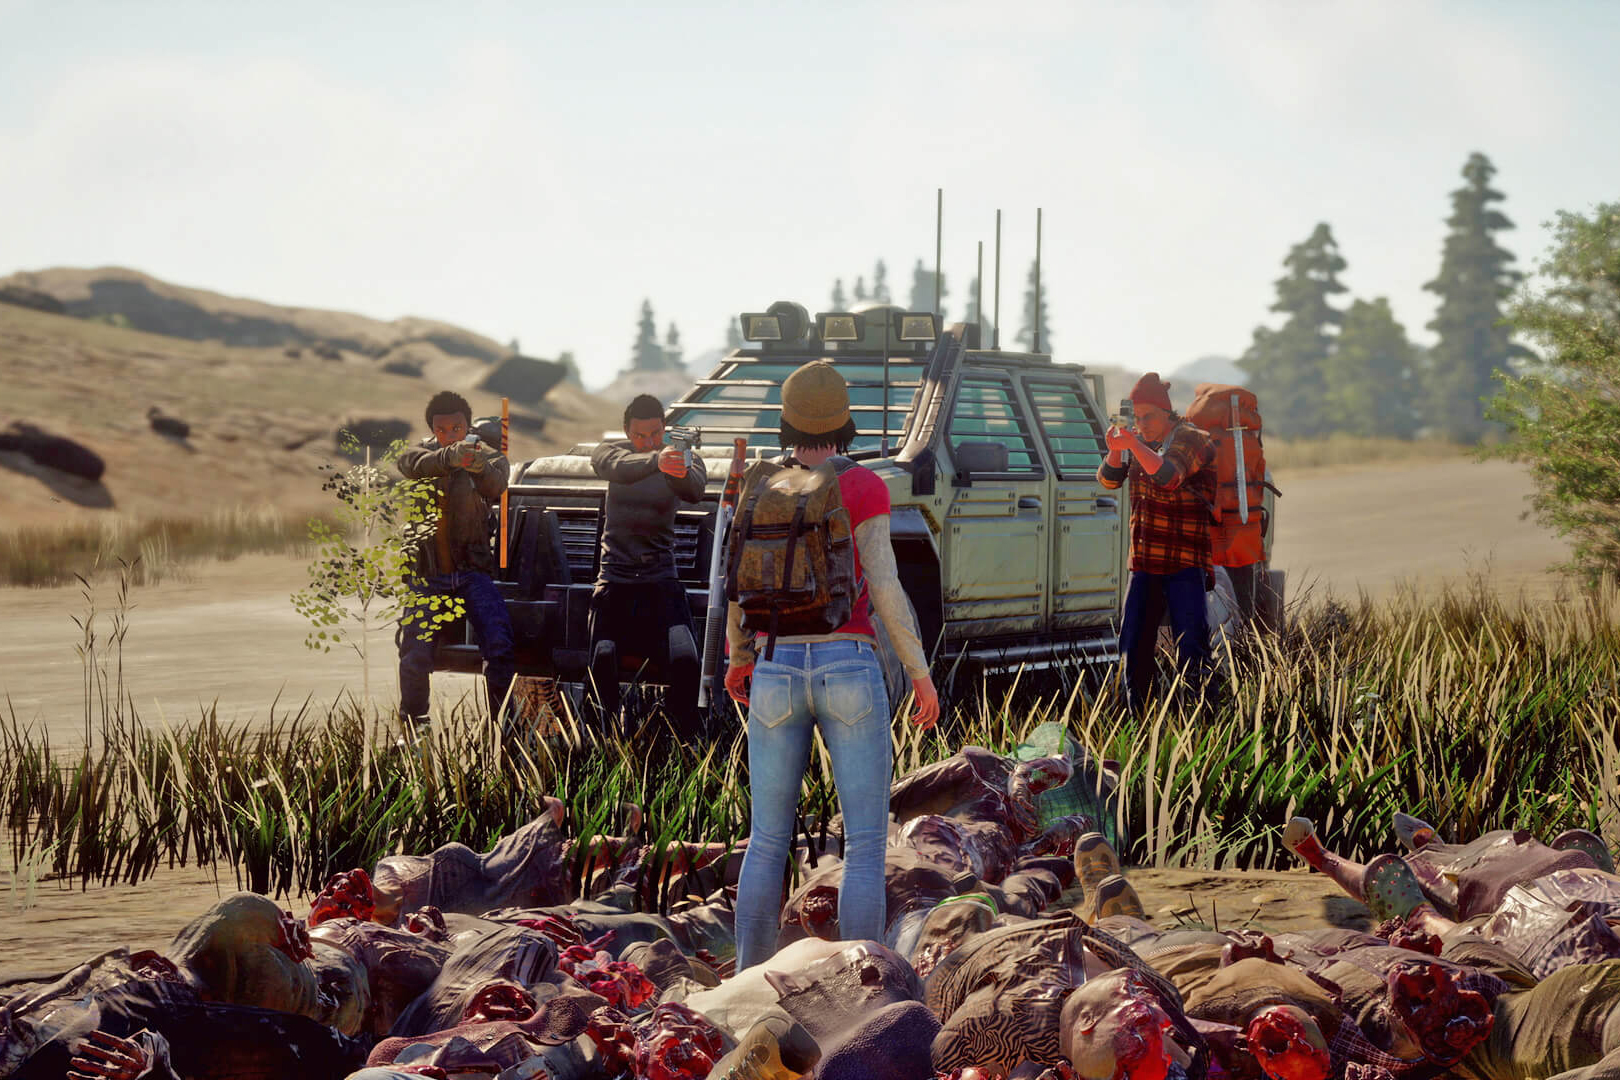 How State of Decay 3 Can Improve the Franchise's Hordes